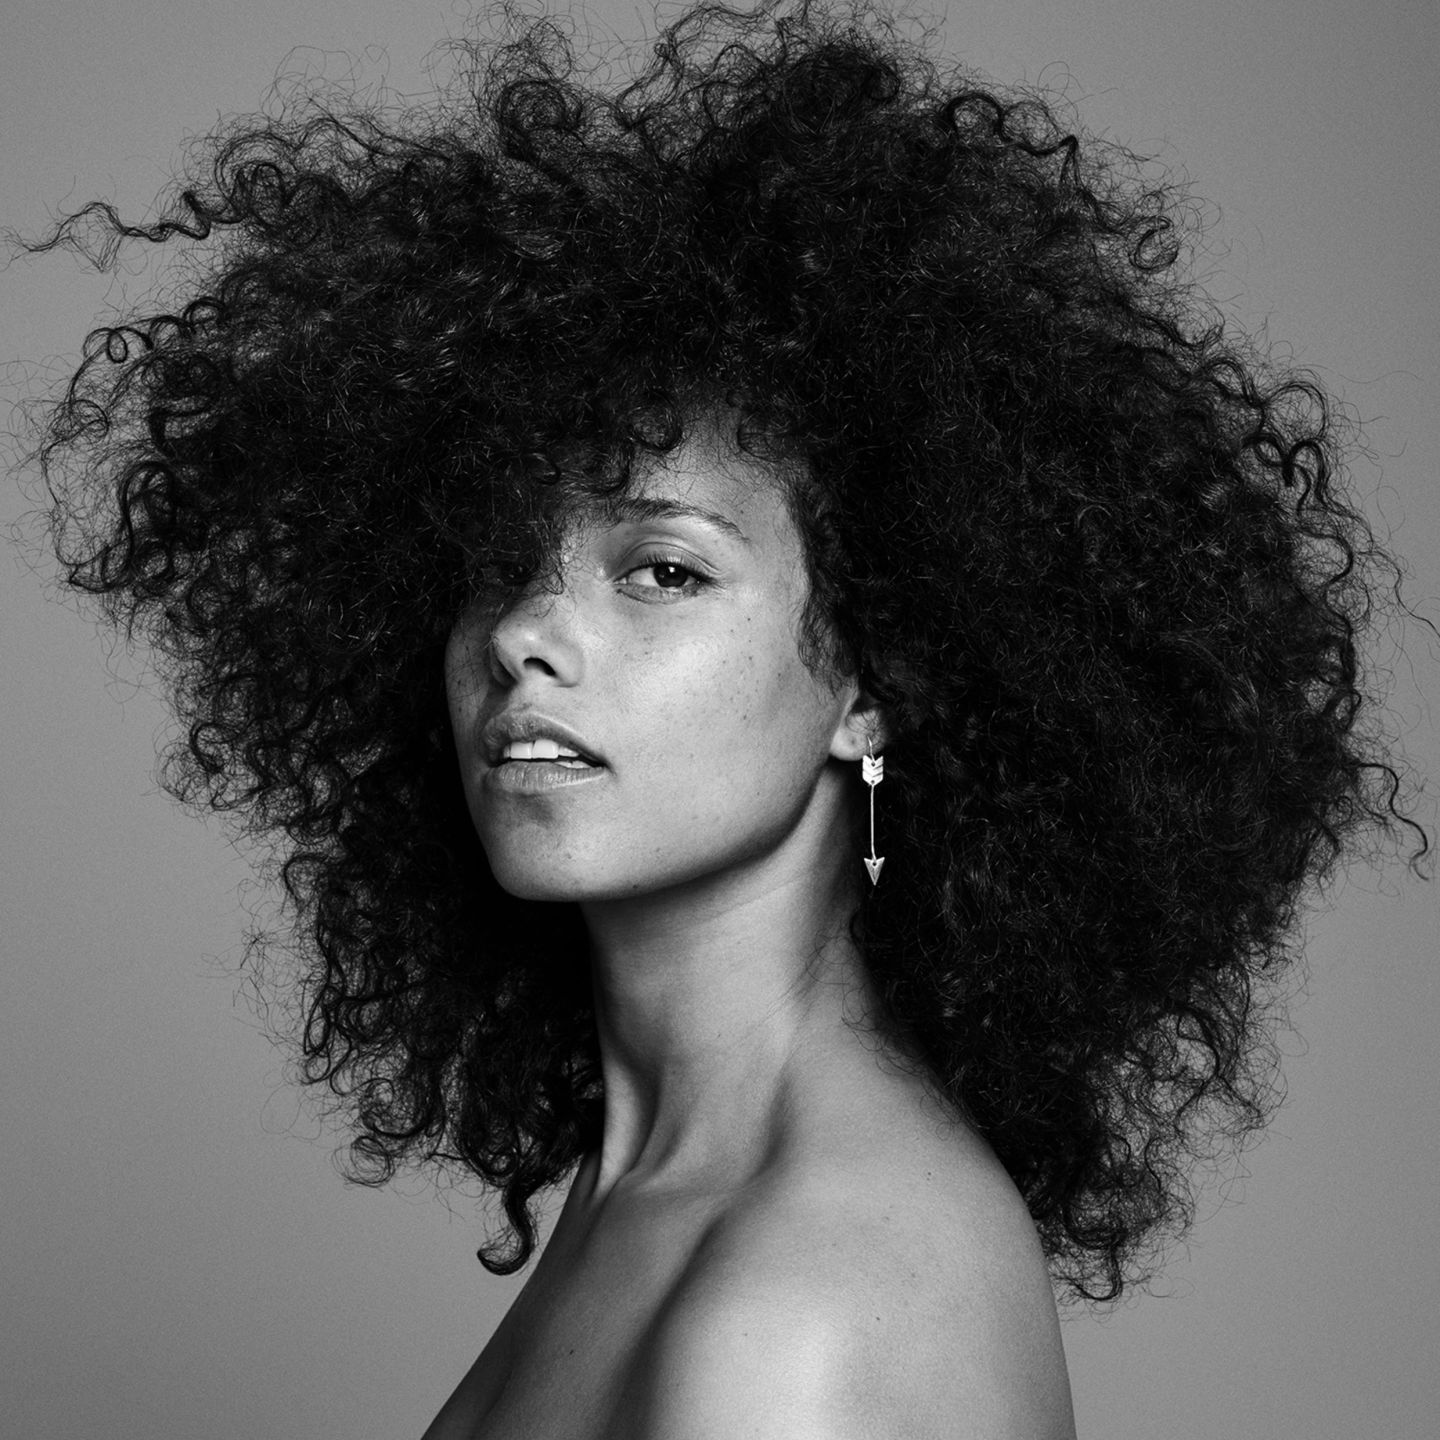 Alicia Keys is Here for natural beauty, women Culture theonlinecurrent